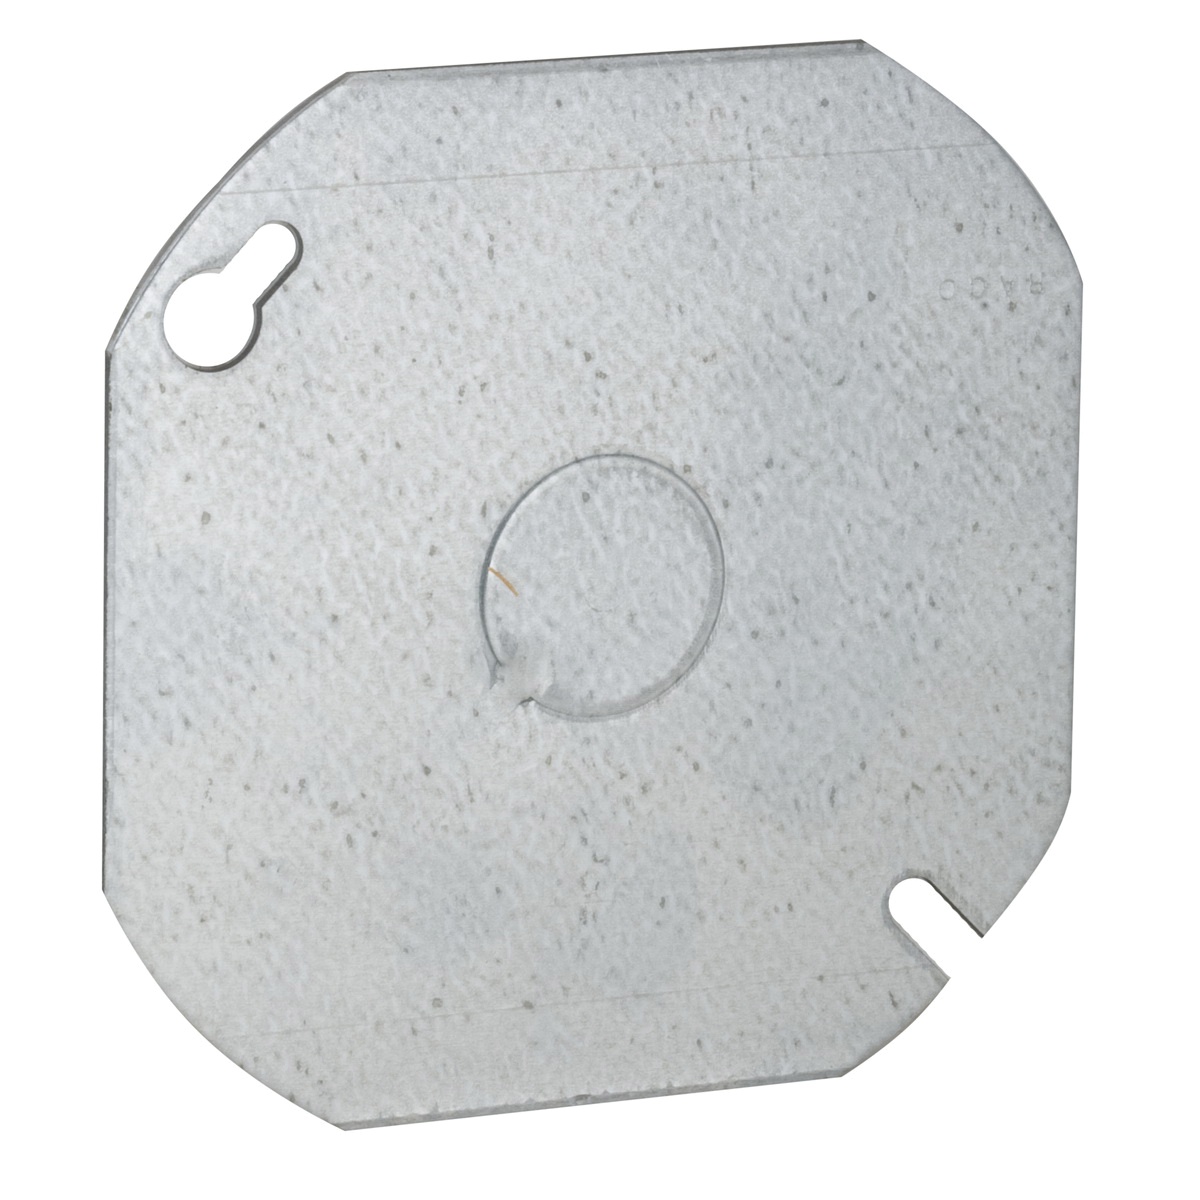 Raco 724 Pre Galvanized Steel Flat Ceiling Cover 0 063 Inch